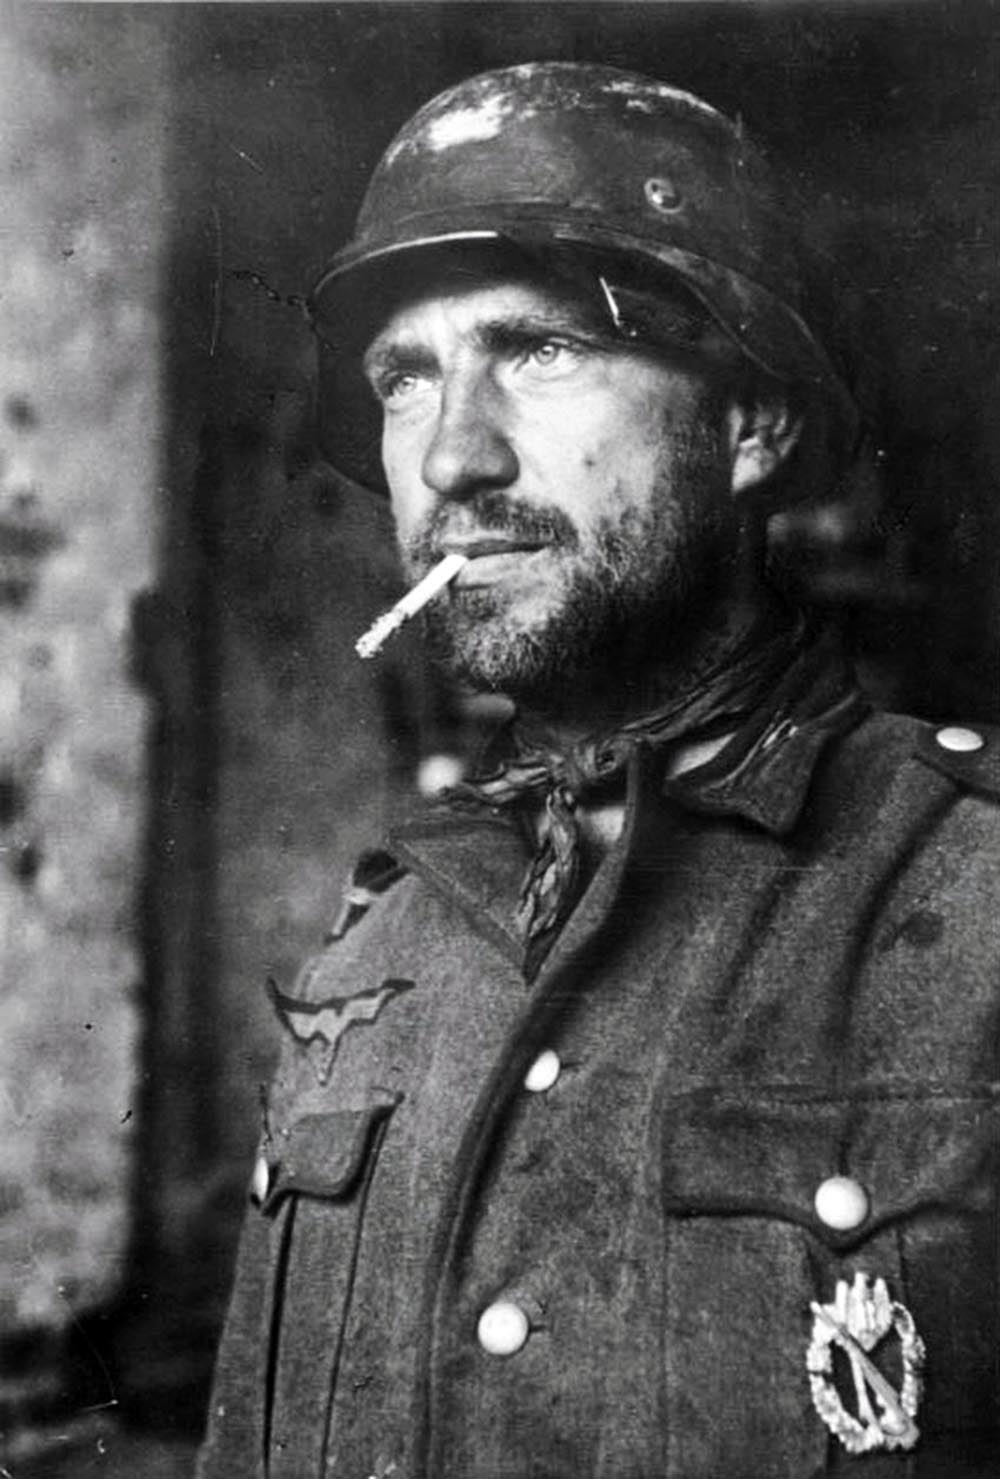  German soldier with a badge on his chest, Stalingrad, November 1942.